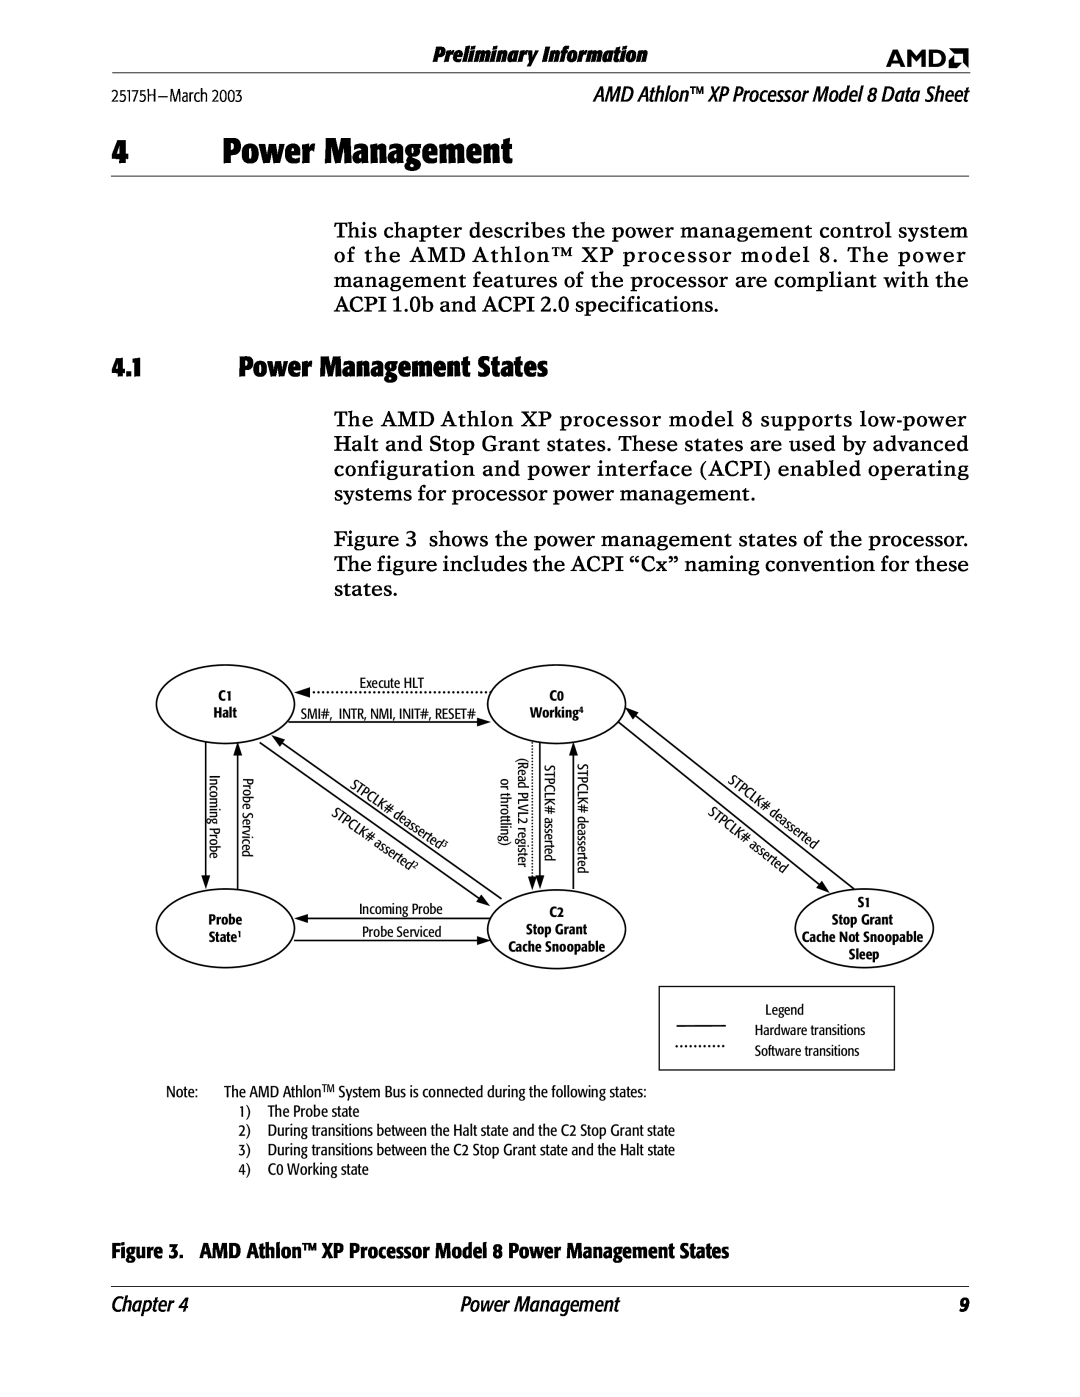 AMD 8 manual Power Management States, Preliminary Information, Chapter 